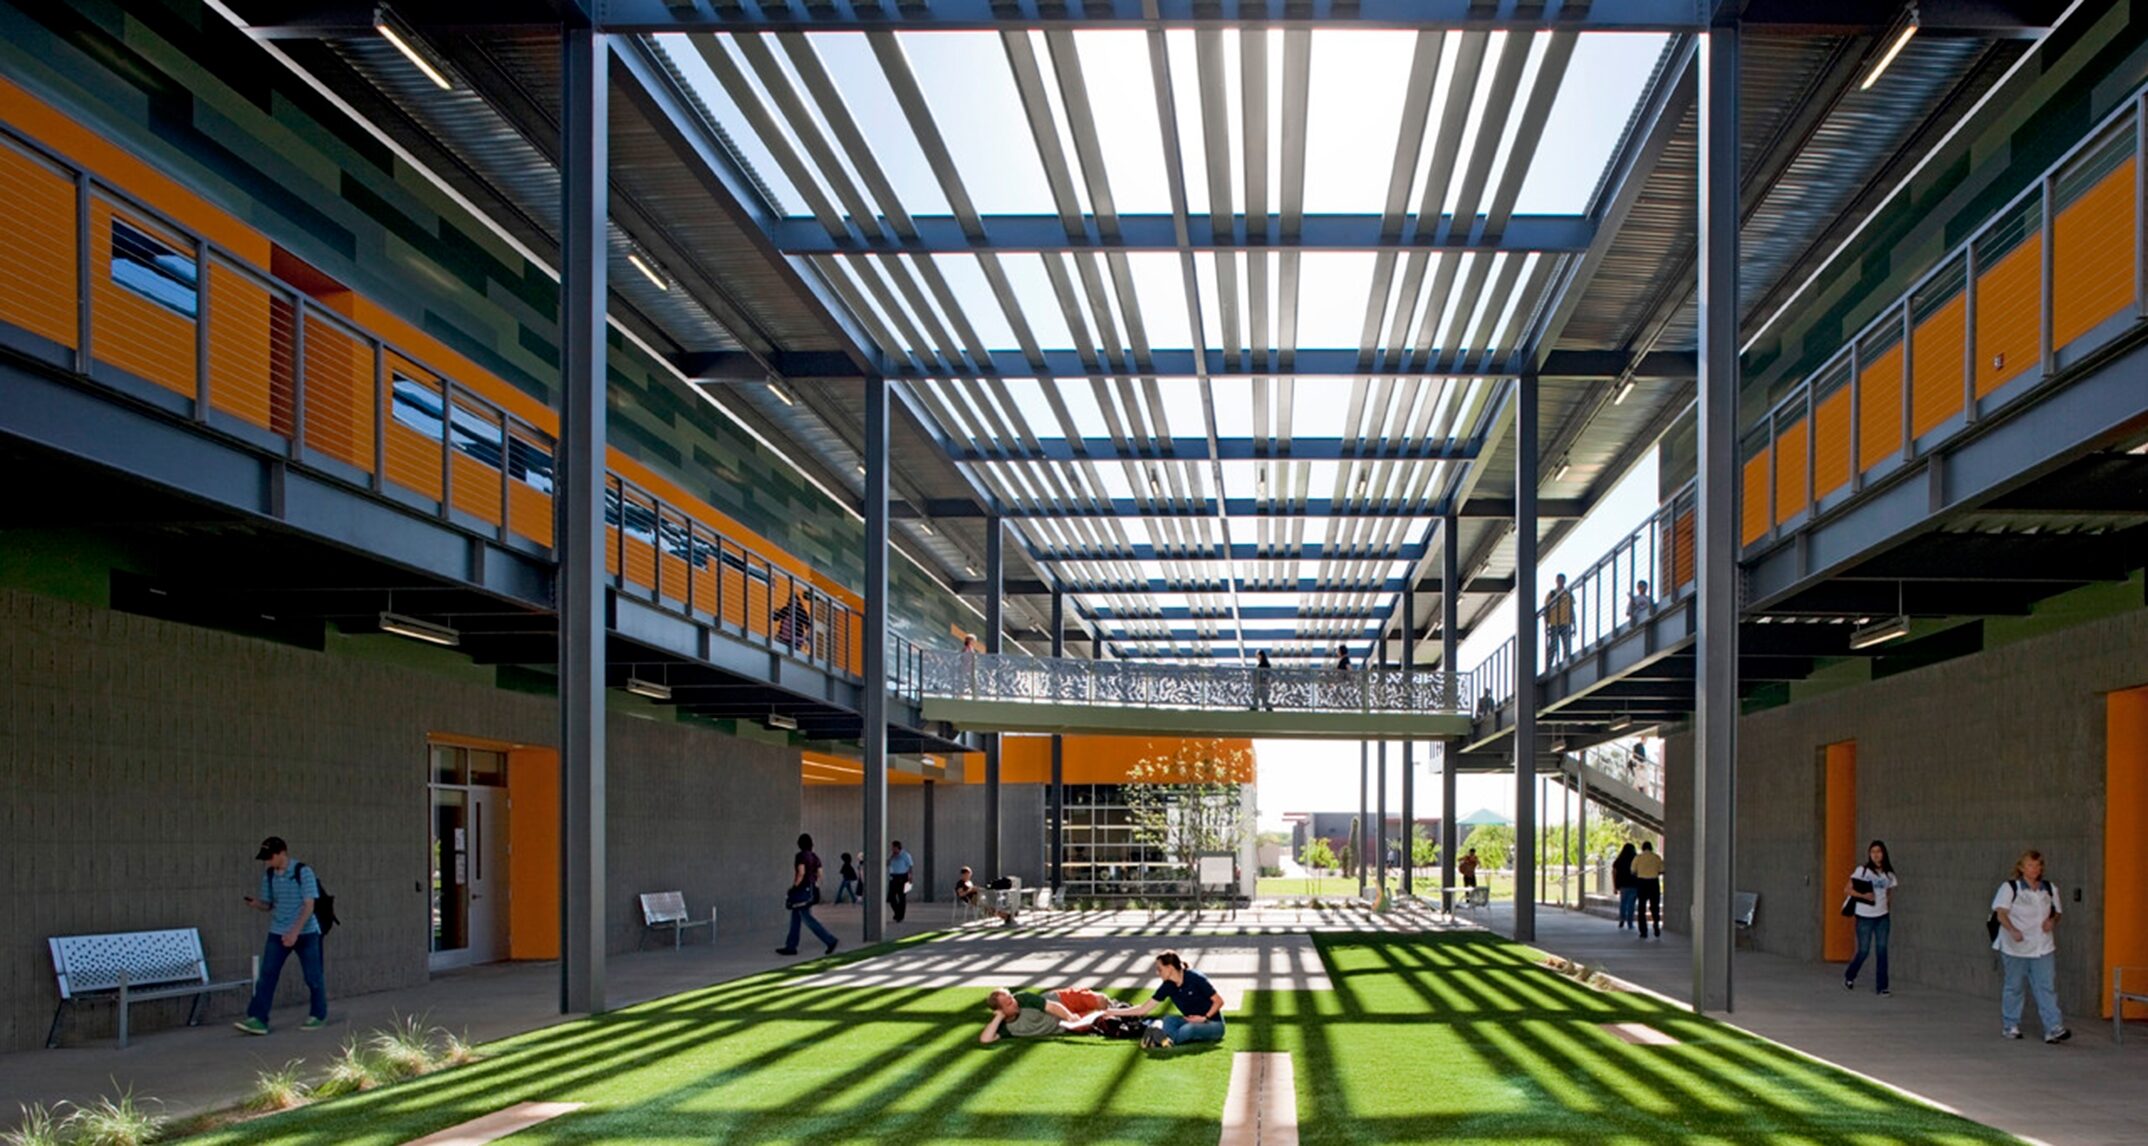 The central plaza at Chandler Gilbert Community College is designed to provide a campus gathering place on a smaller scale. Elevated walkways around the perimeter encourage interaction but the more intimate setting helps students feel sheltered and safe. – Architekton